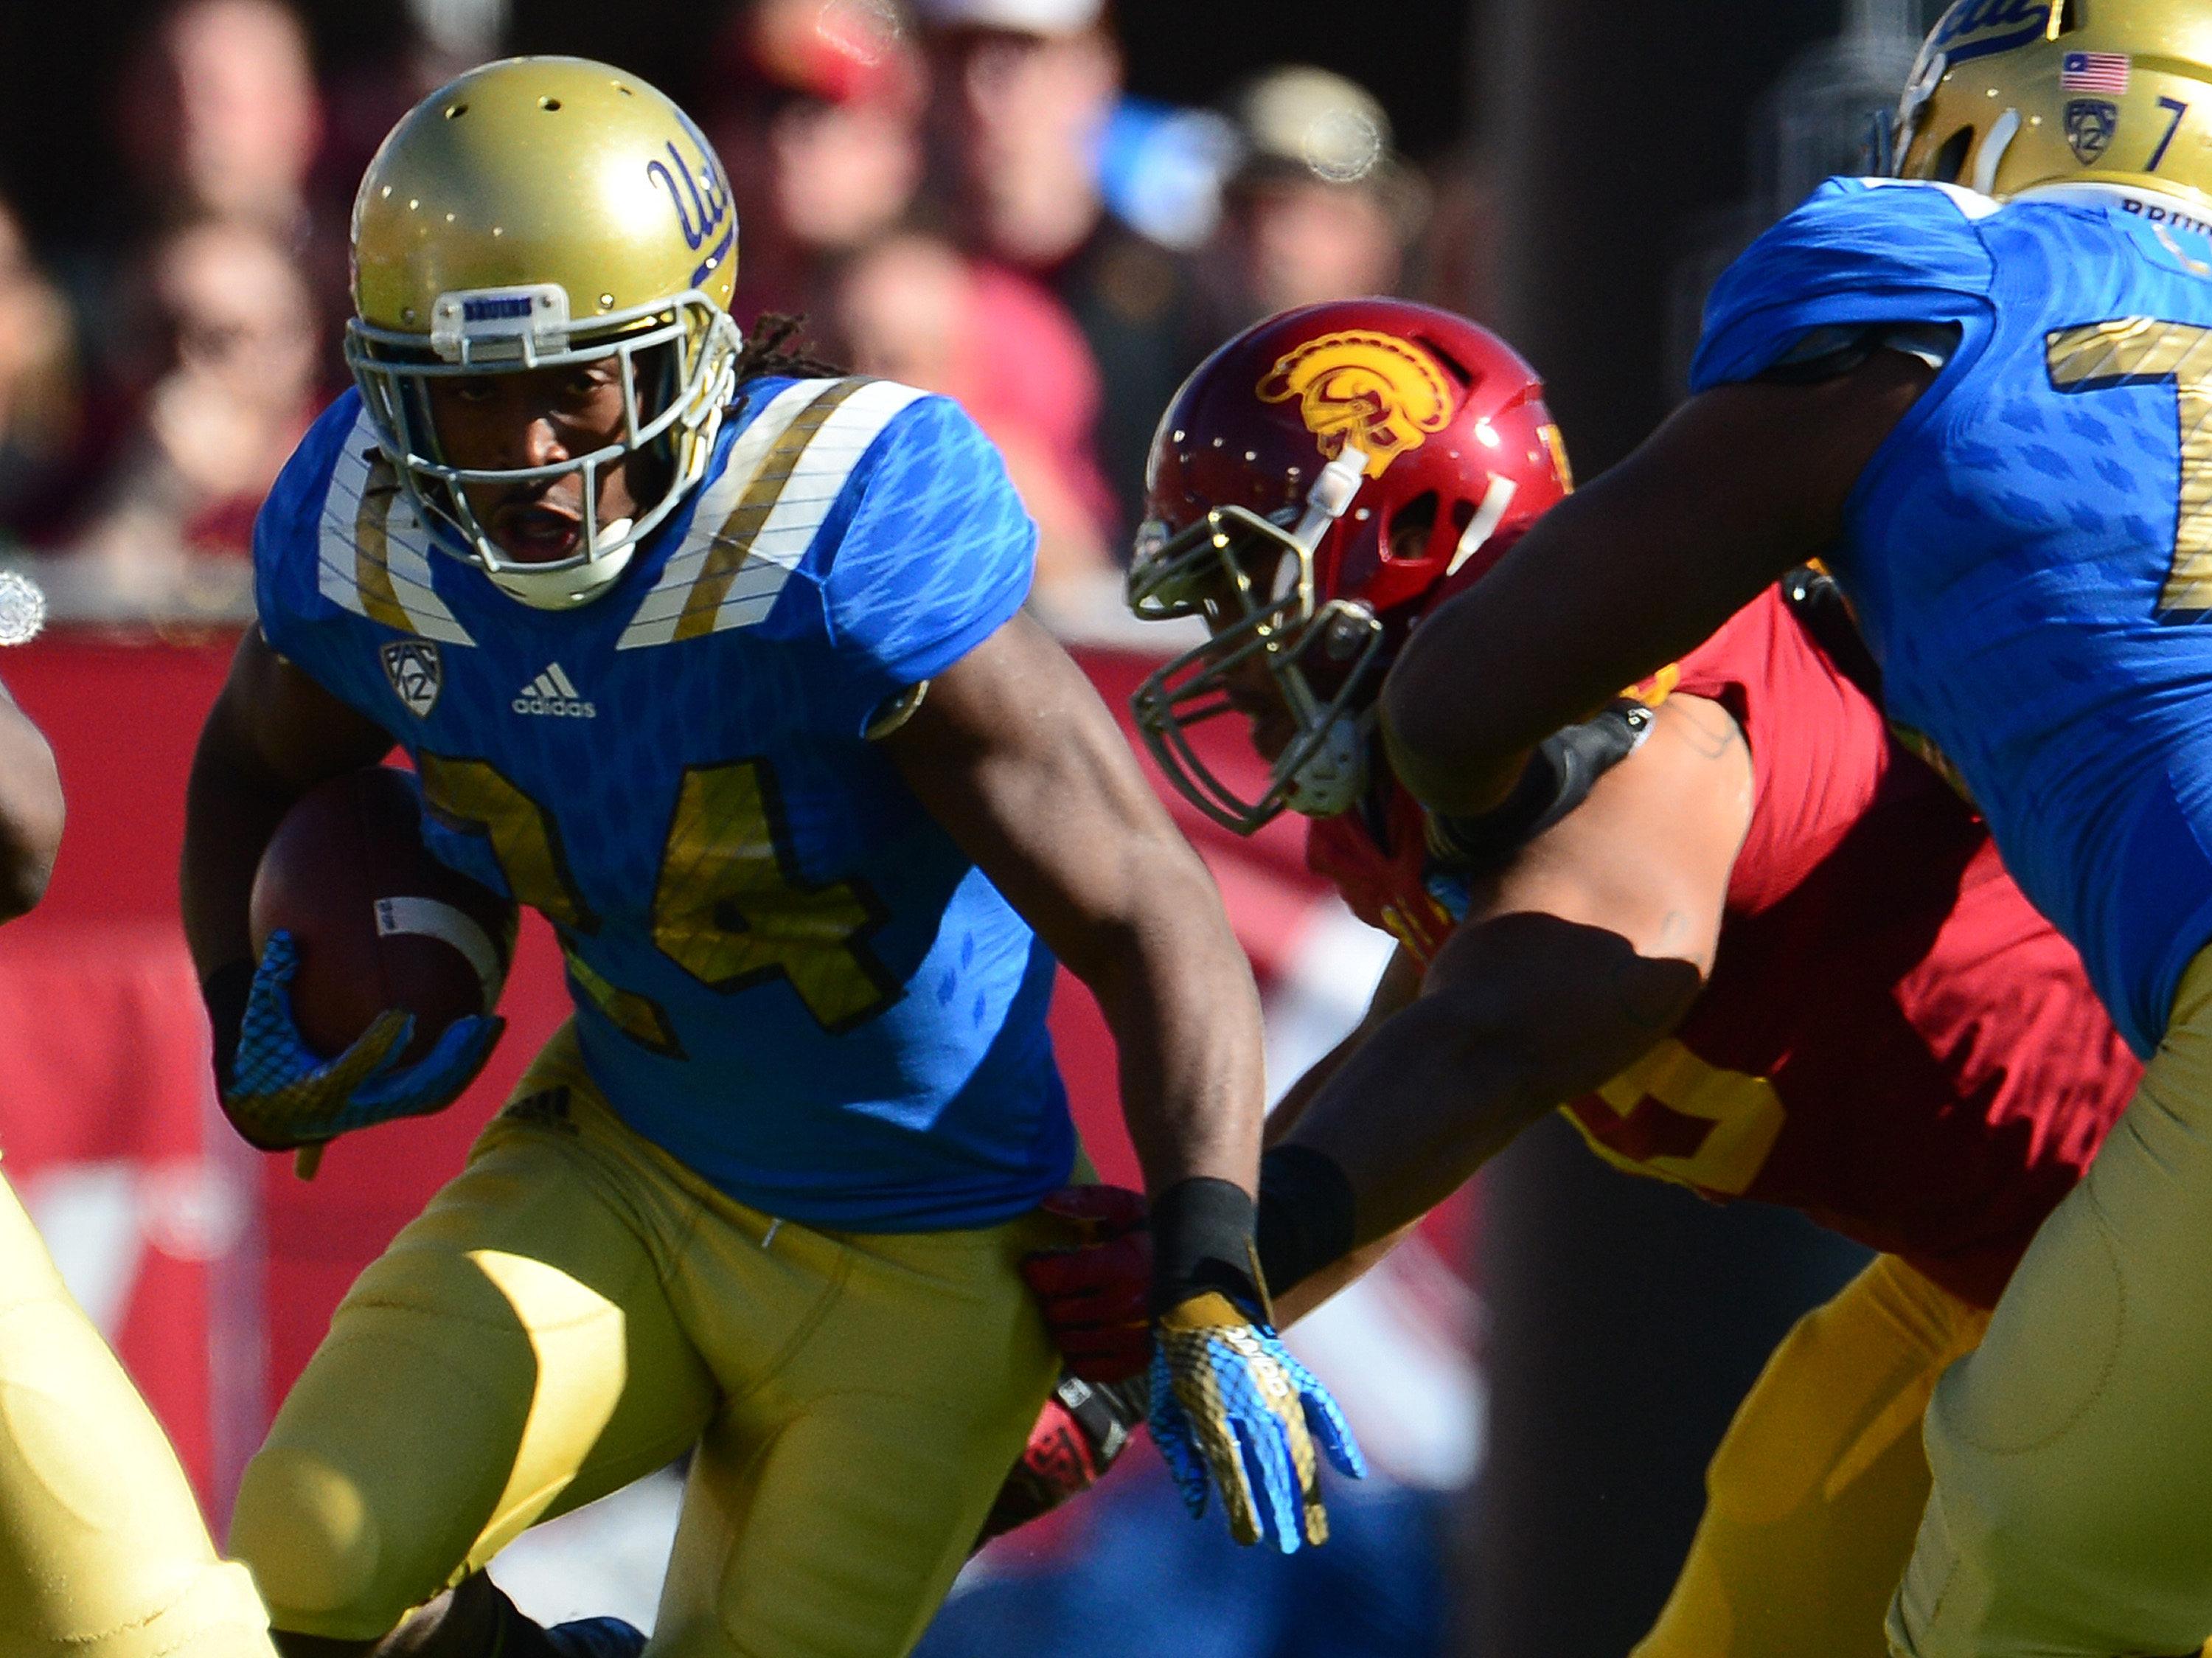 UCLA running back Paul Perkins (24) will enter the 2016 NFL draft, forgoing his final year of eligibility. (Keith Birmingham/Staff)